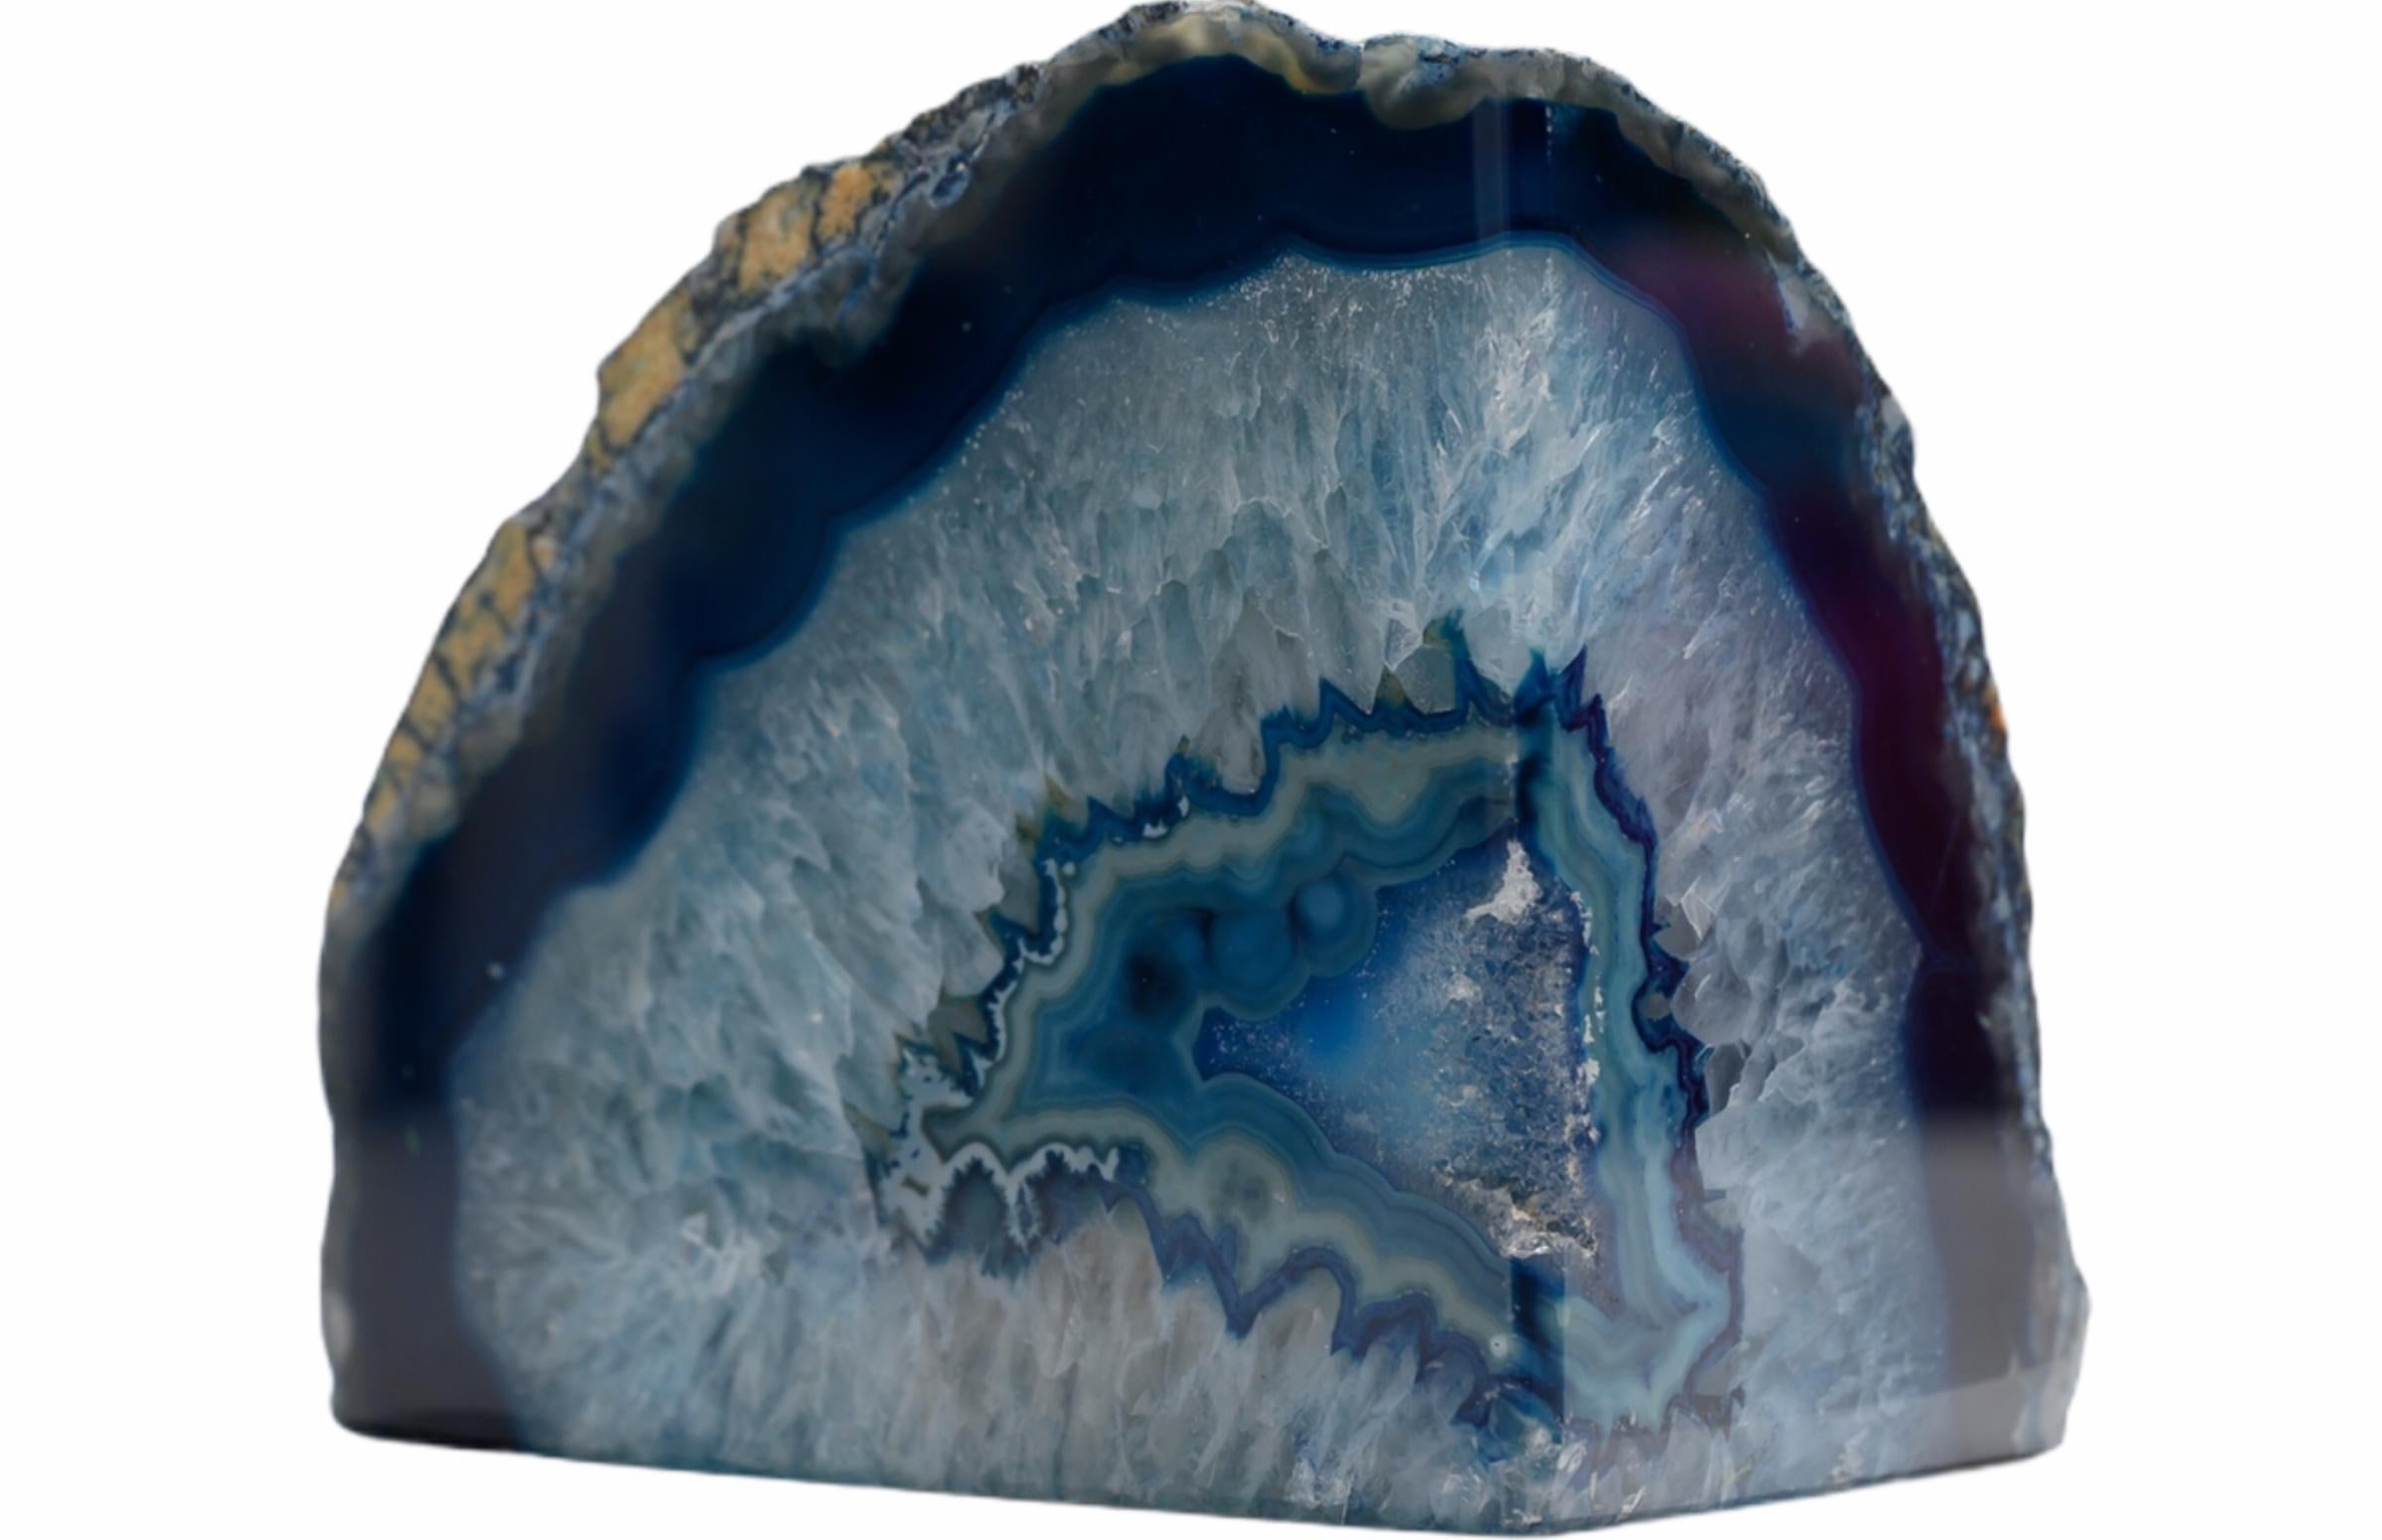 An impressive pair of blue organic geode bookends with a long history. Brightly colored with naturally formed patterns caused by fossilization over hundreds of years. Finished with a highly polished surface, the exterior edges retaining raw, organic